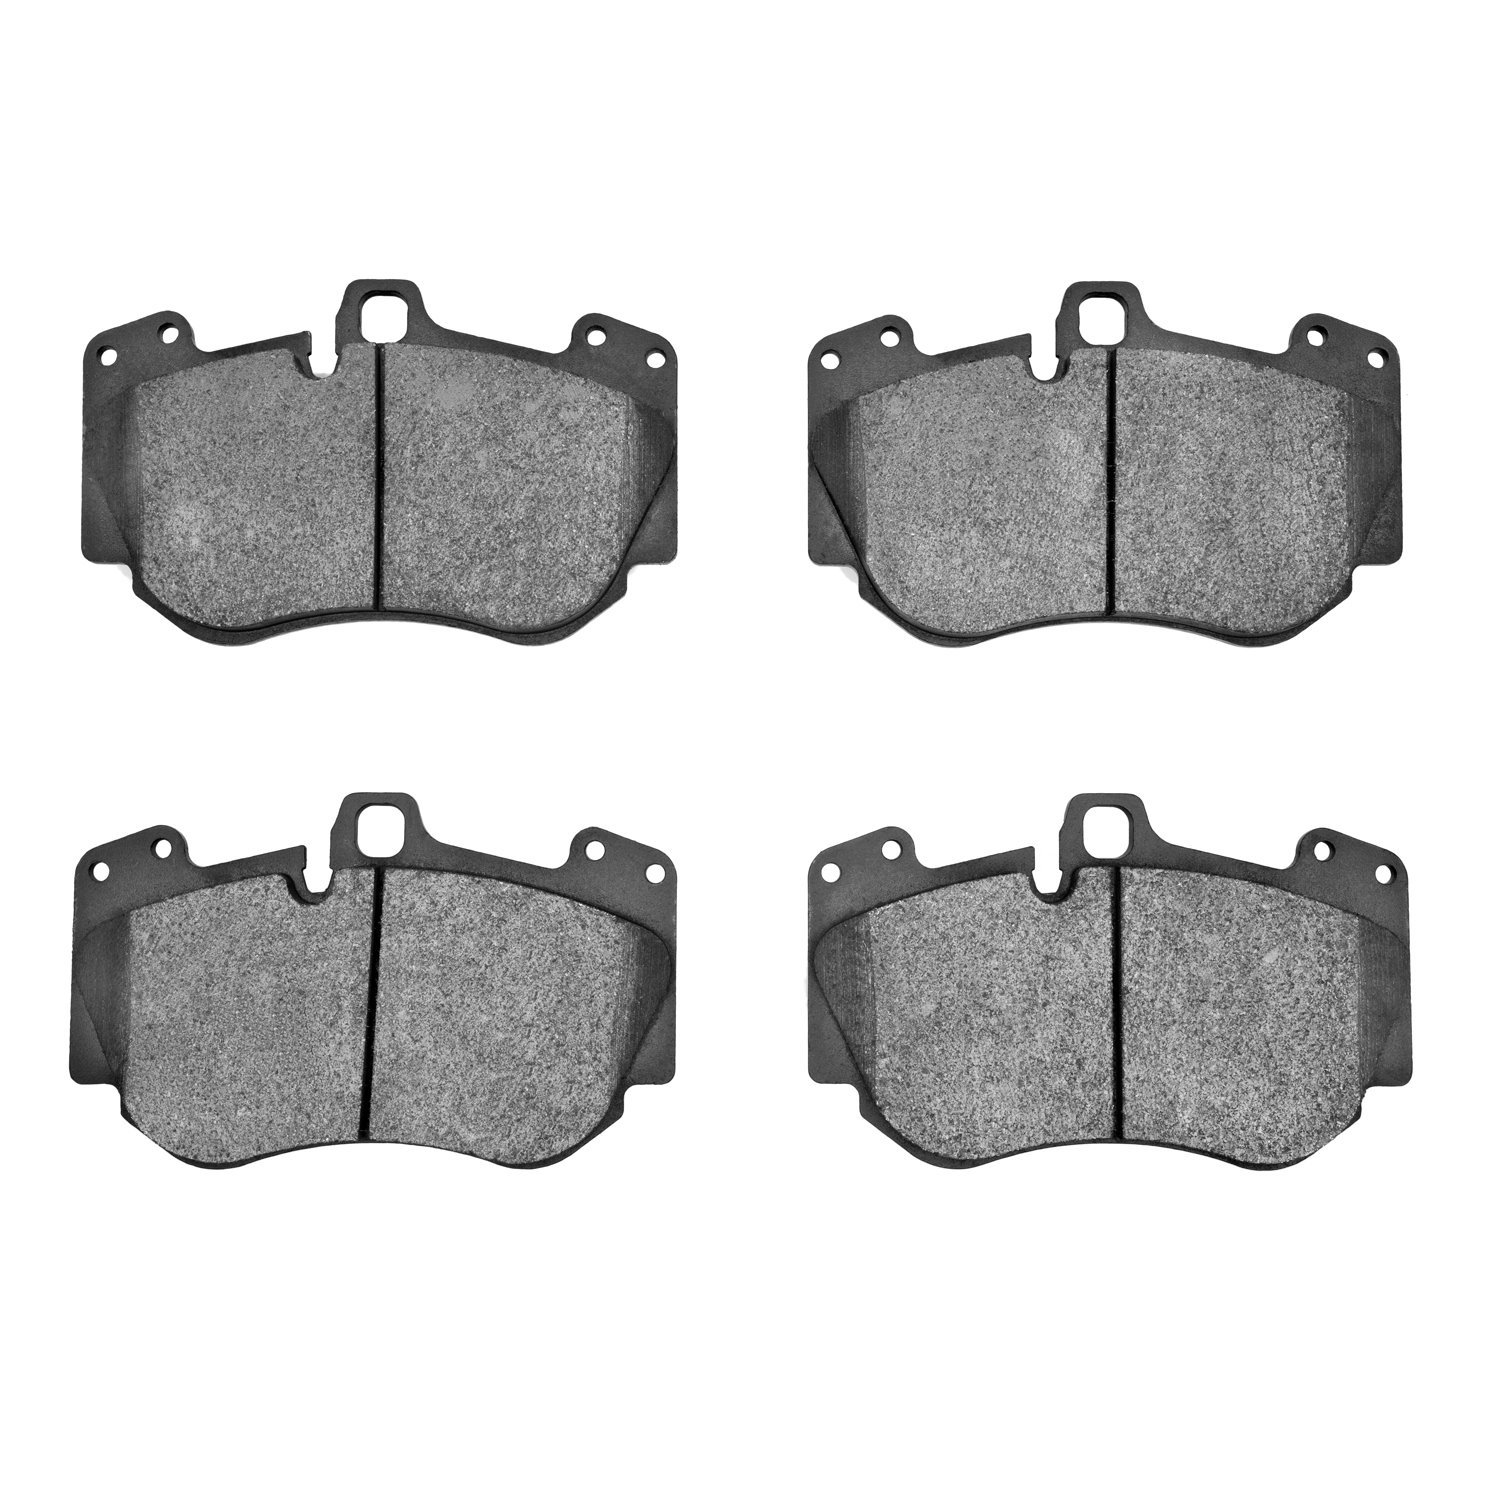 1551-1130-10 5000 Advanced Low-Metallic Brake Pads, Fits Select Multiple Makes/Models, Position: Front